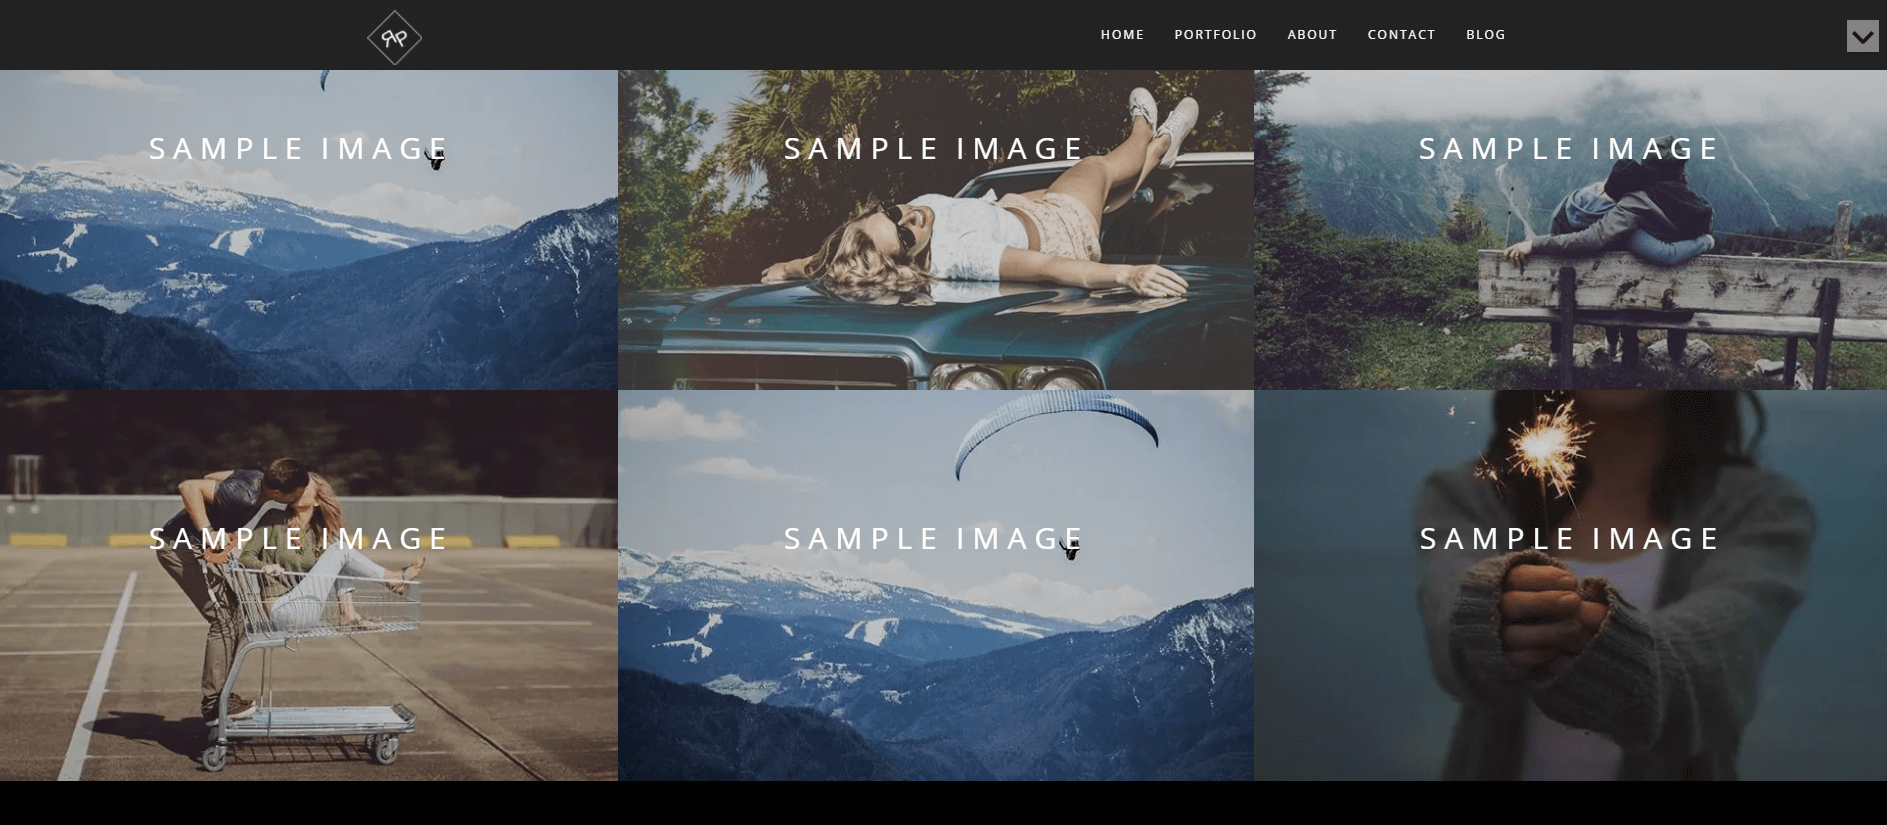 A WordPress photography website built with the Rokophoto theme.